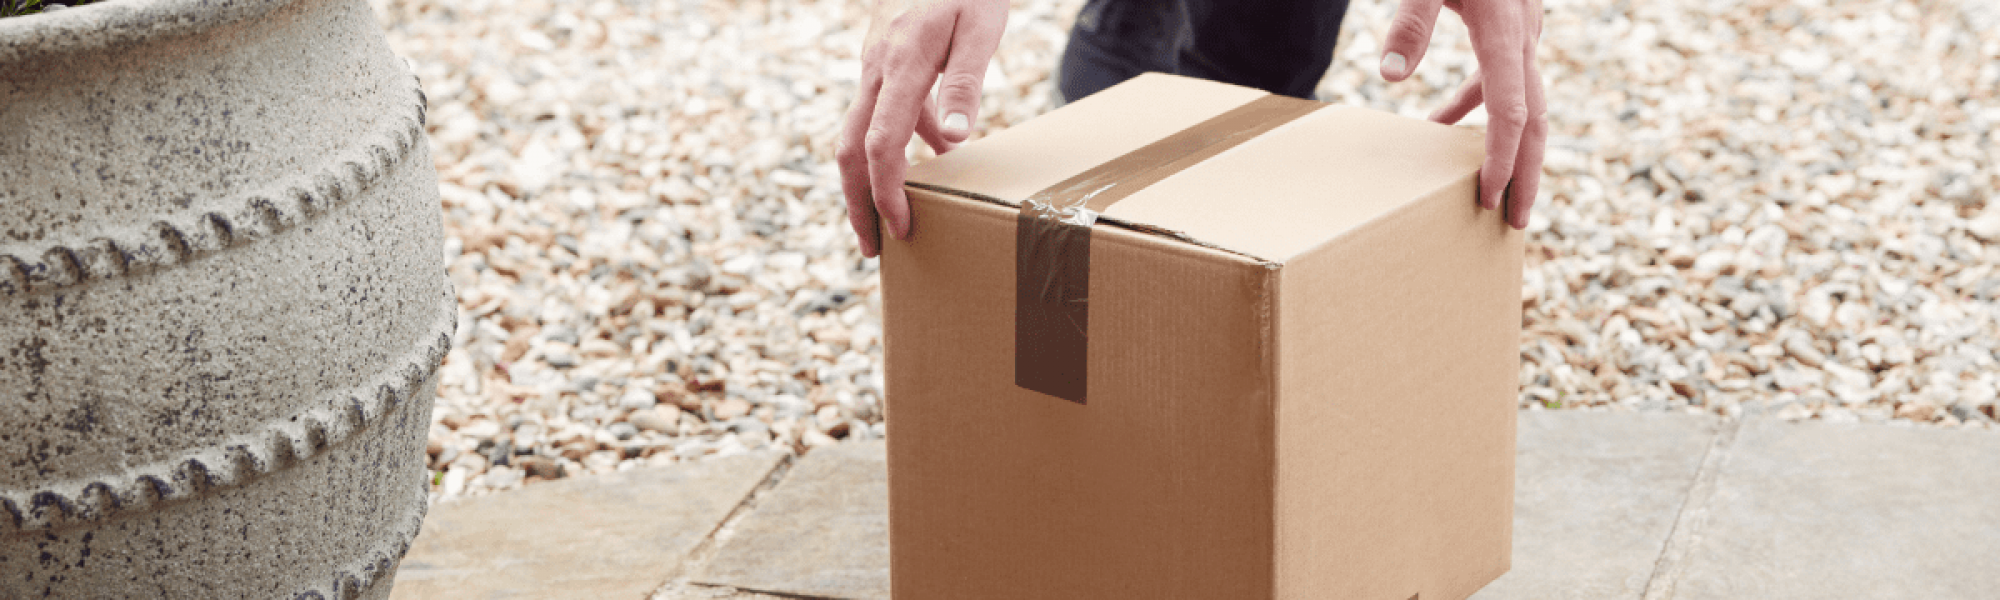 person delivering brown box package on doorstep